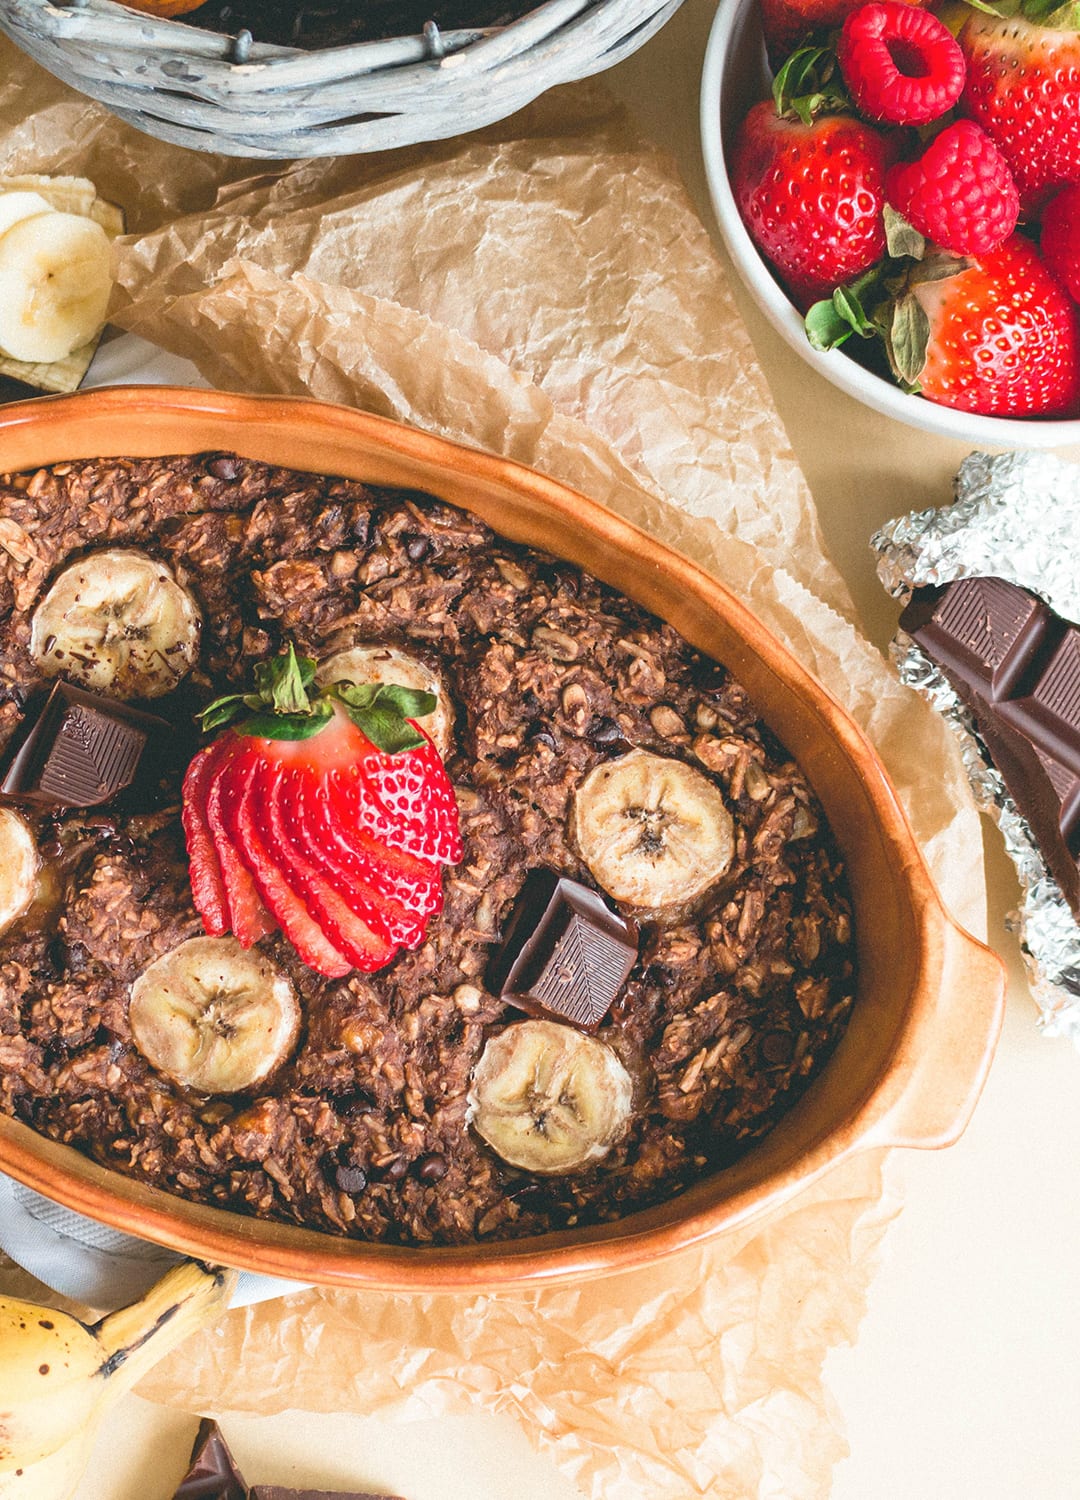 21 Oatmeal Recipes You Need To Try (vegan, gluten-free) - every flavor you can think of! With chocolate, berries, tropical fruit, chia seeds, acai, superfoods, spices, and remakes of famous desserts! Made with oats, buckwheat, or quinoa. Delicious! | thehealthfulideas.com